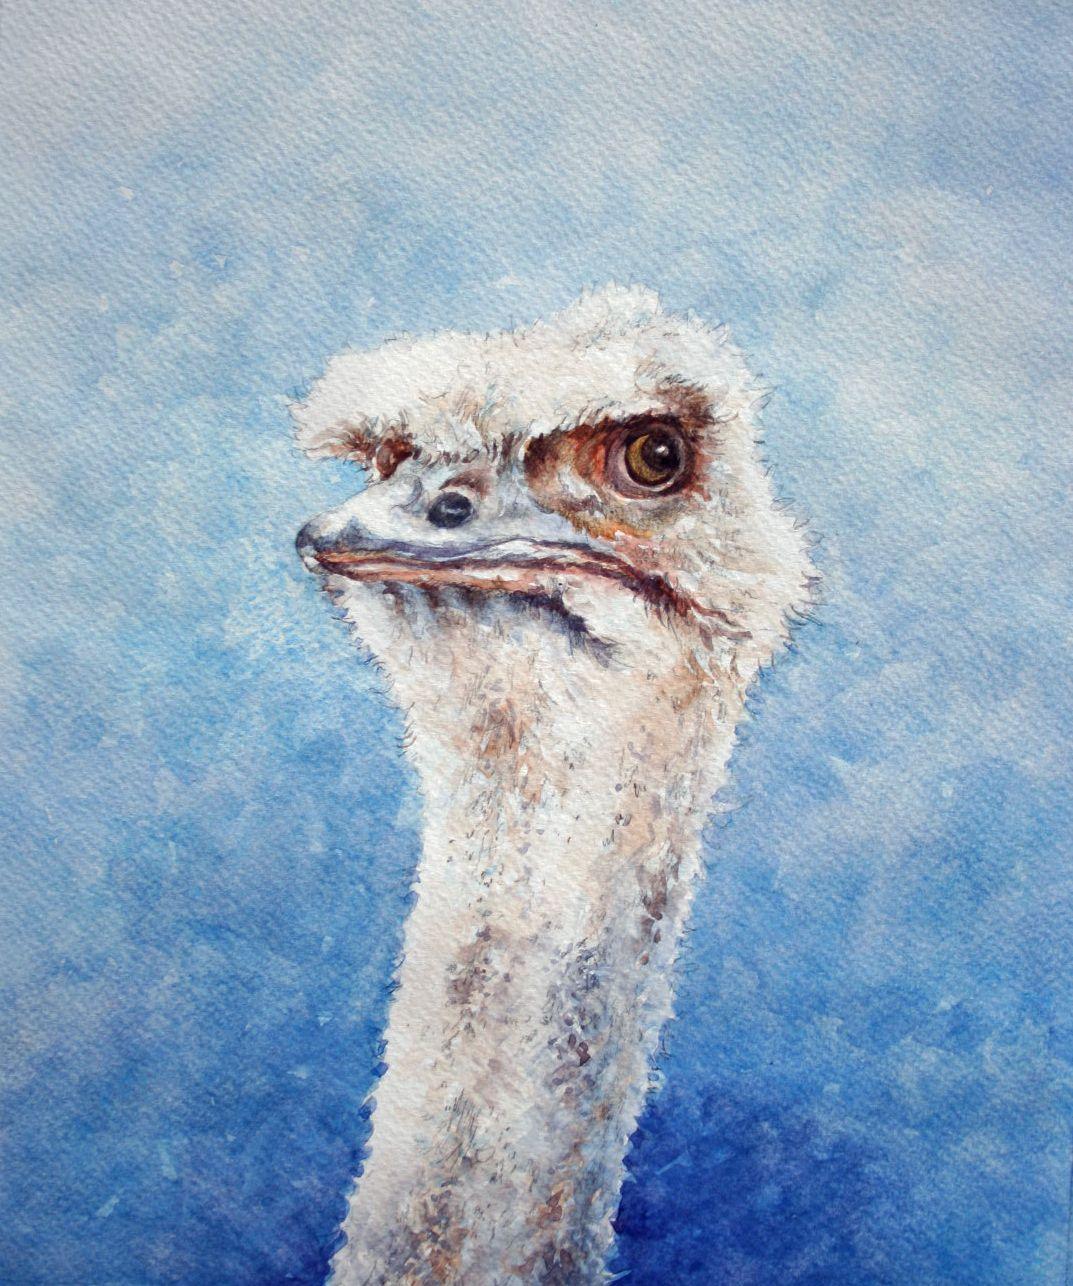 The Look. Ostritch, Painting, Watercolor on Watercolor Paper - Art by Christopher Hughes